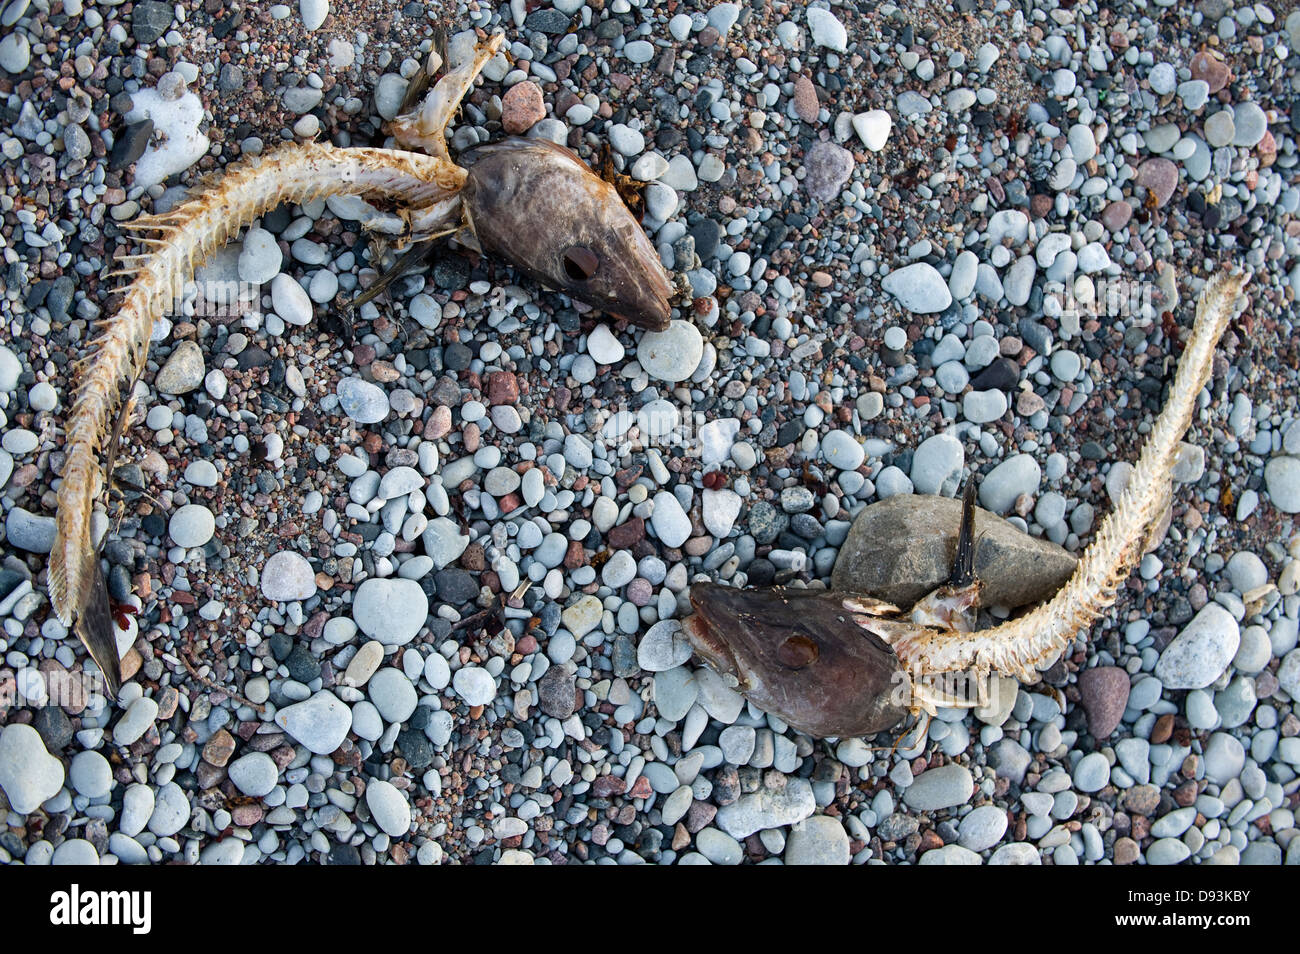 The skeletons of codfish on a beach, Sweden. Stock Photo